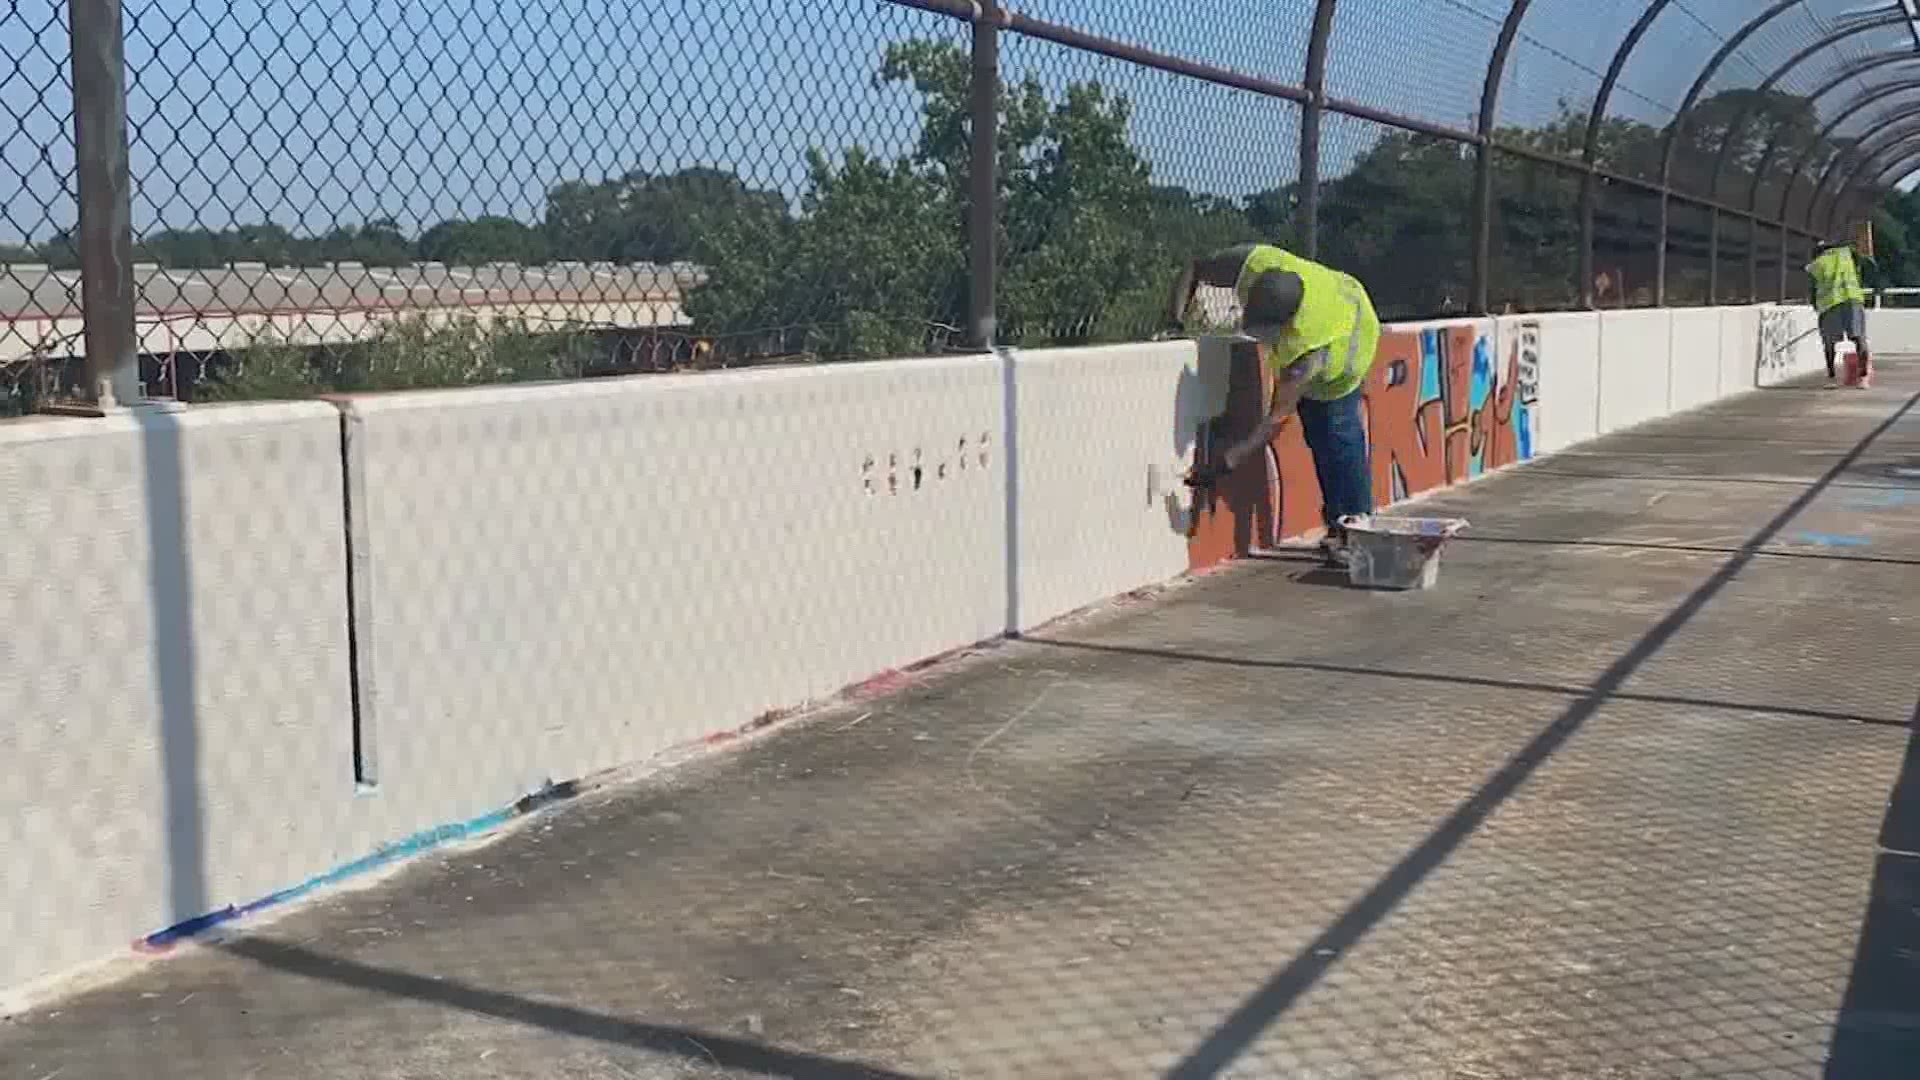 Graffiti is getting painted over in Harris County as part of a new program taking aim at vandalism. The people wiping the slate clean are getting a fresh start thems